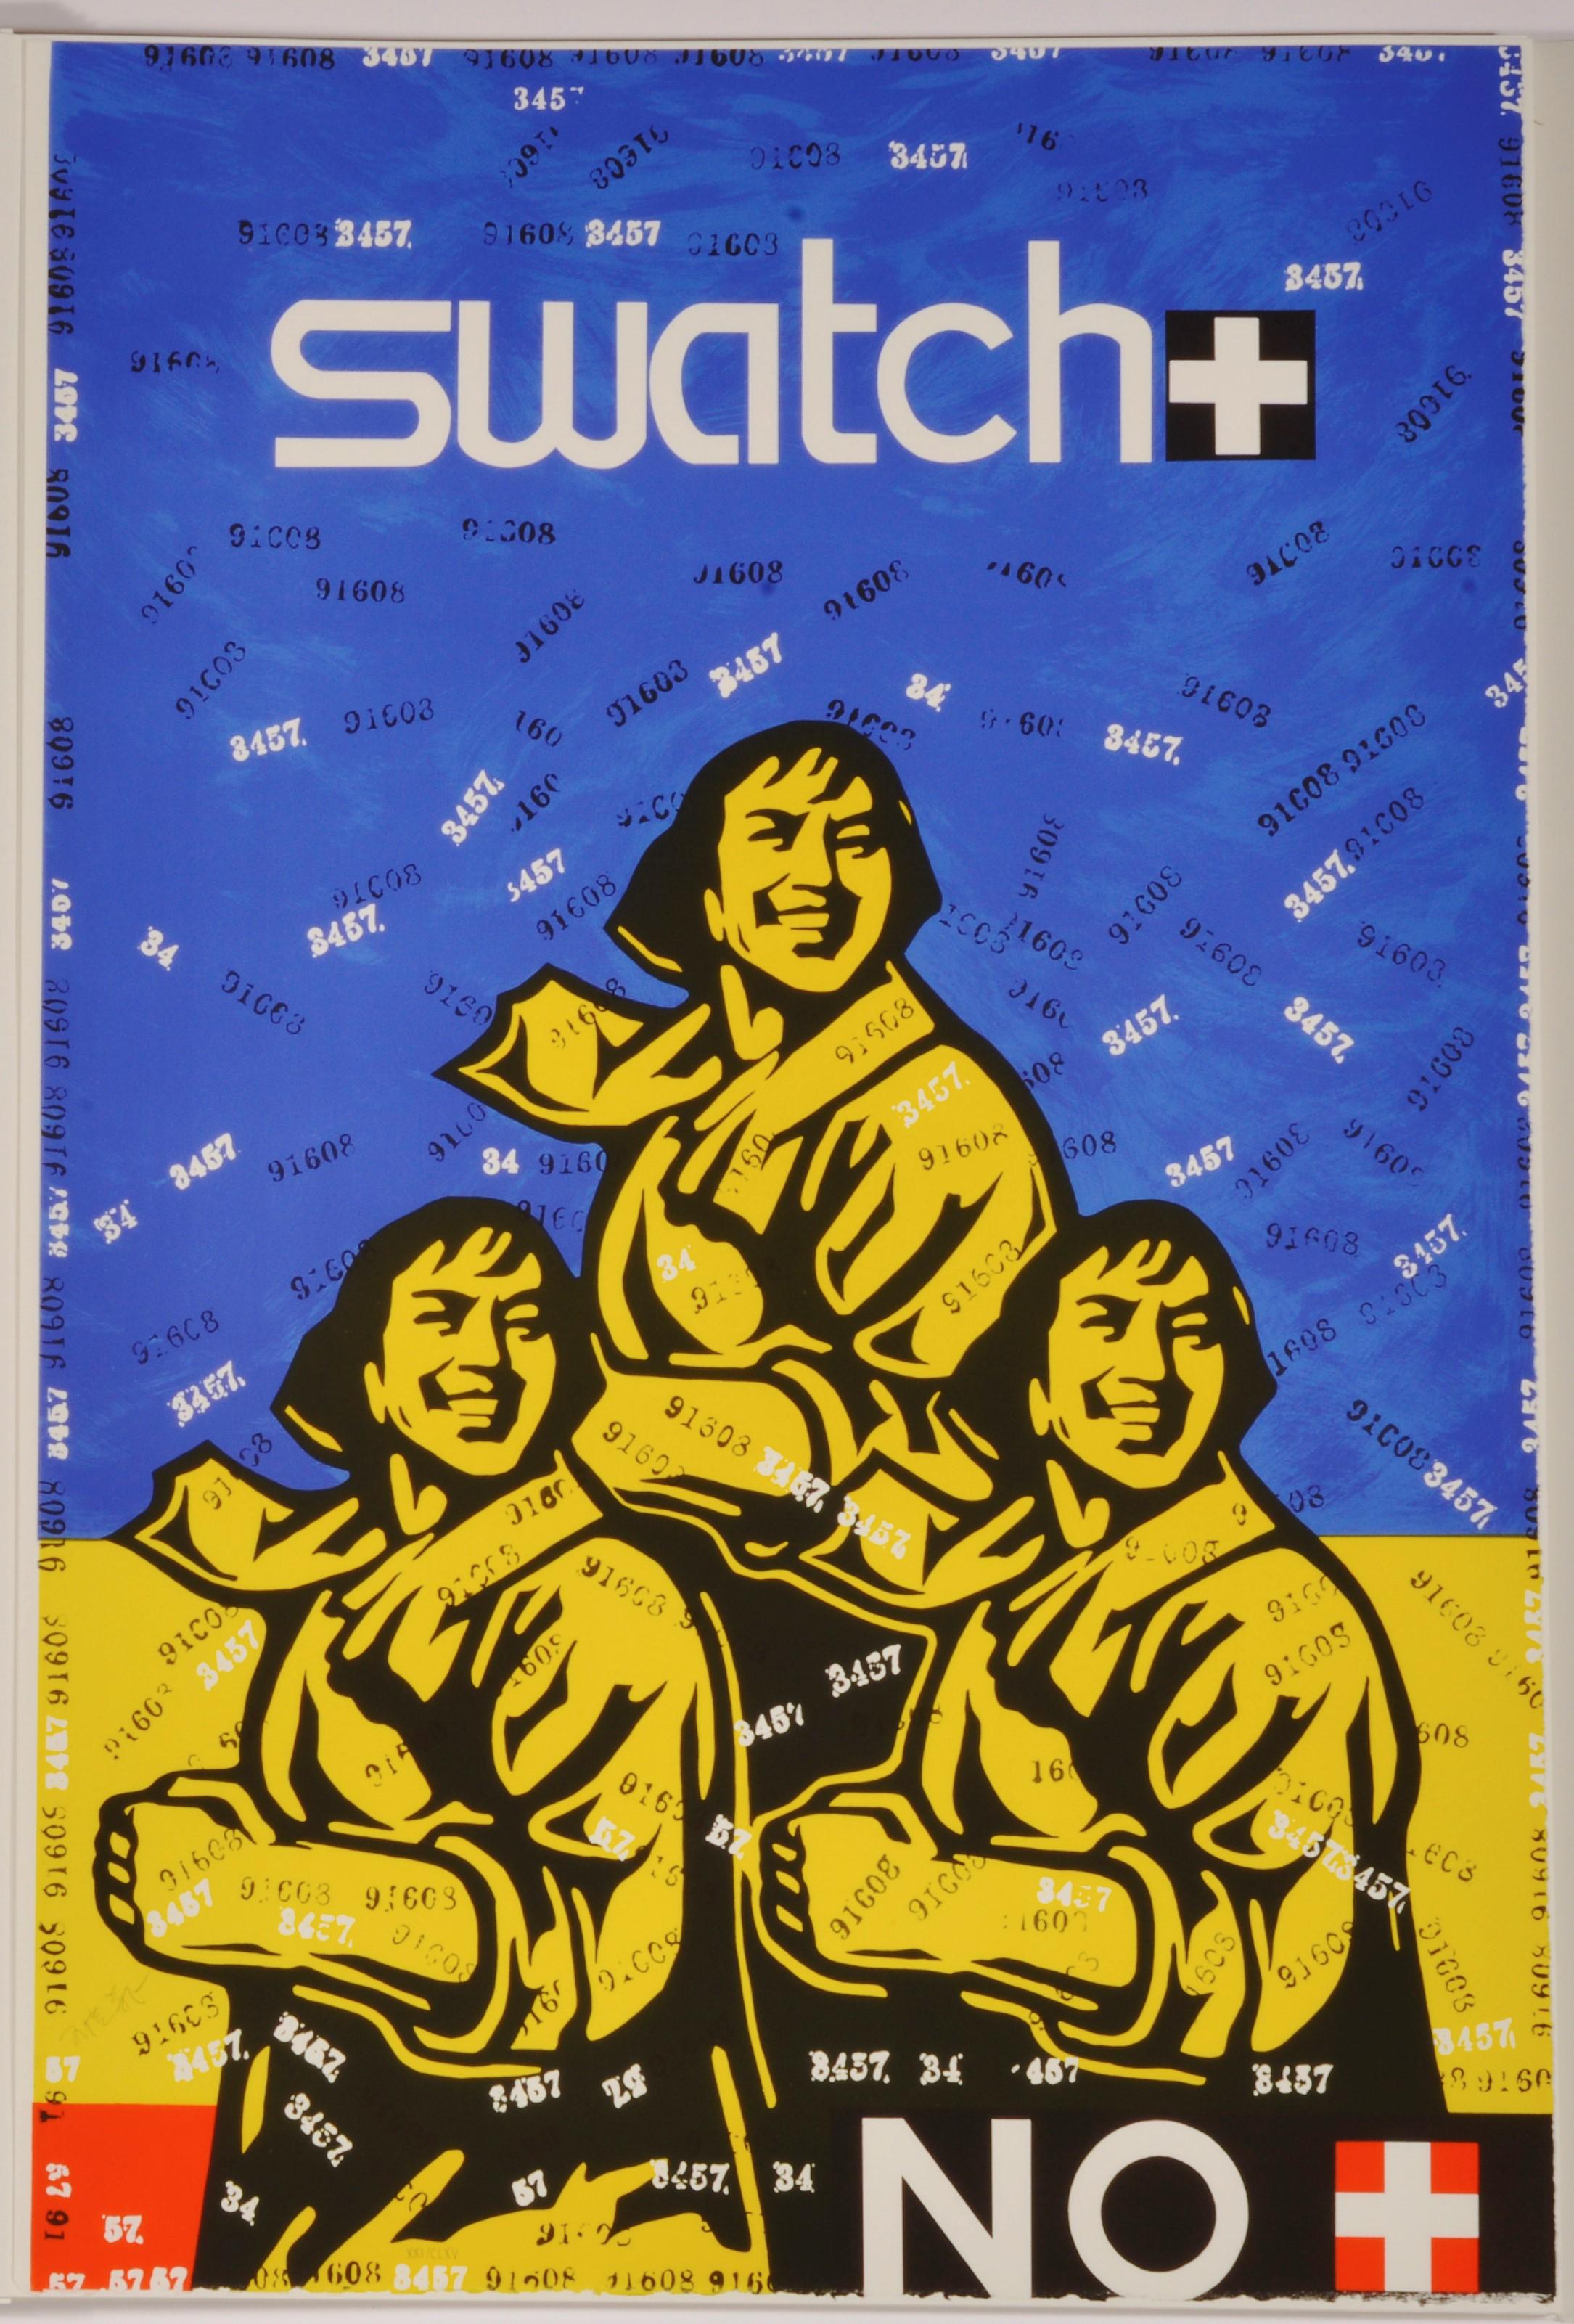 Figurative Print Wang Guangyi - Swatch No - Contemporary, 21st Century, Lithograph, Limited Edition, Chinese